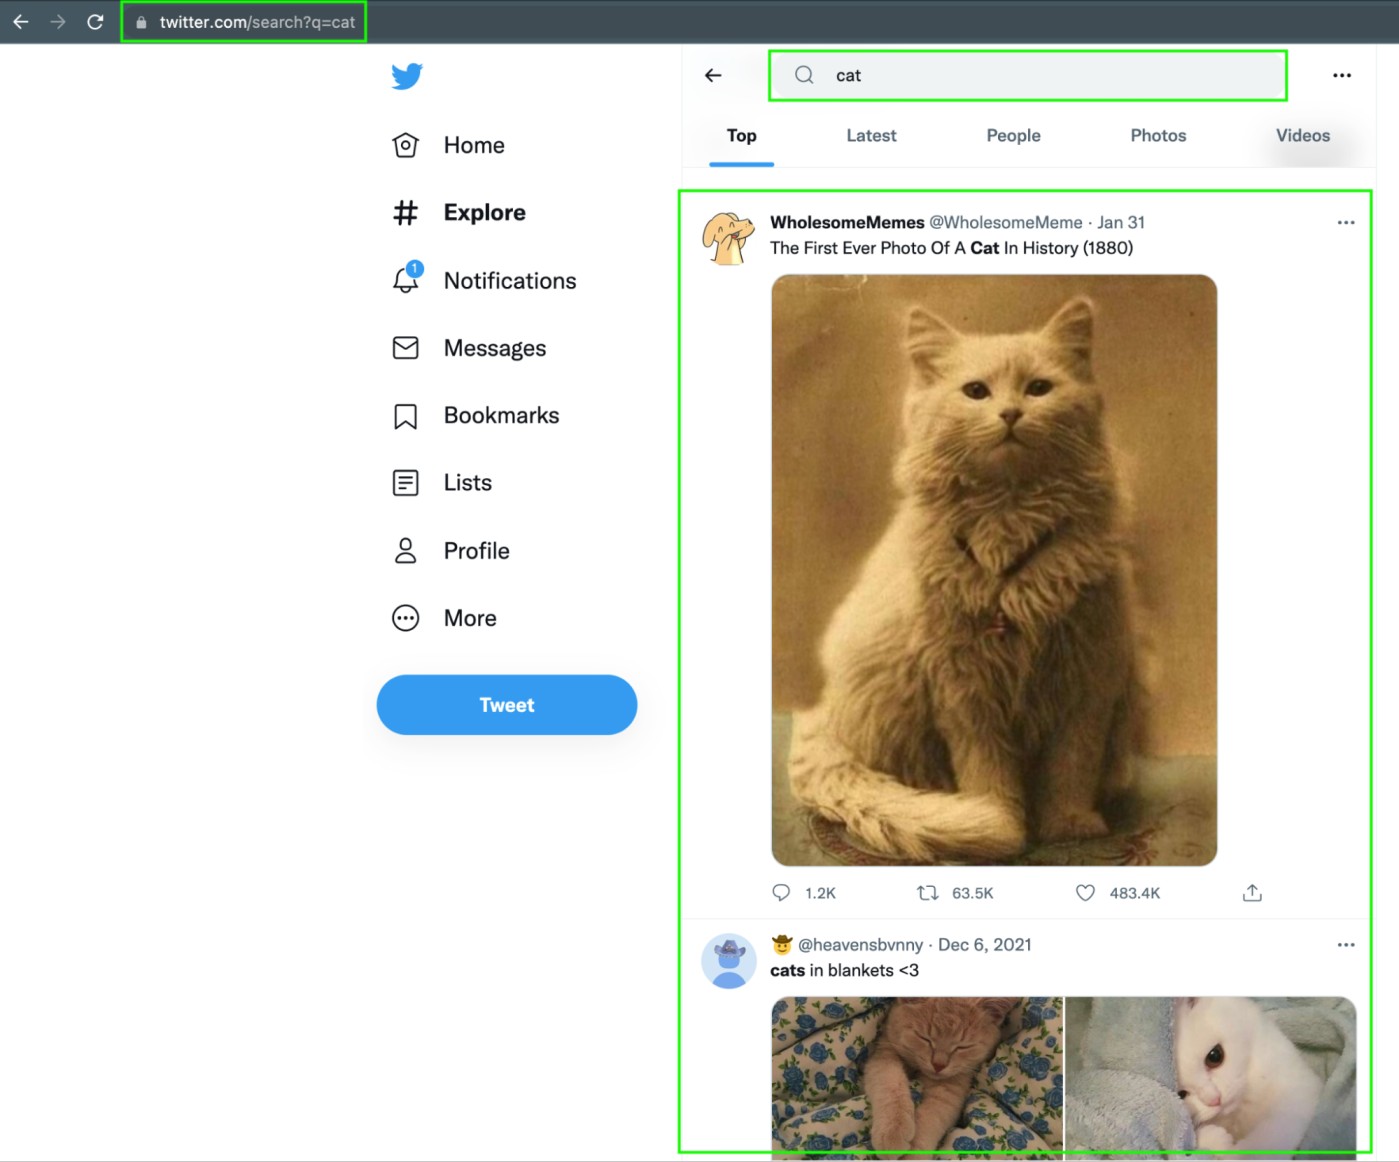 Twitter's search API: the URL, search functionality and page result are framed in green.